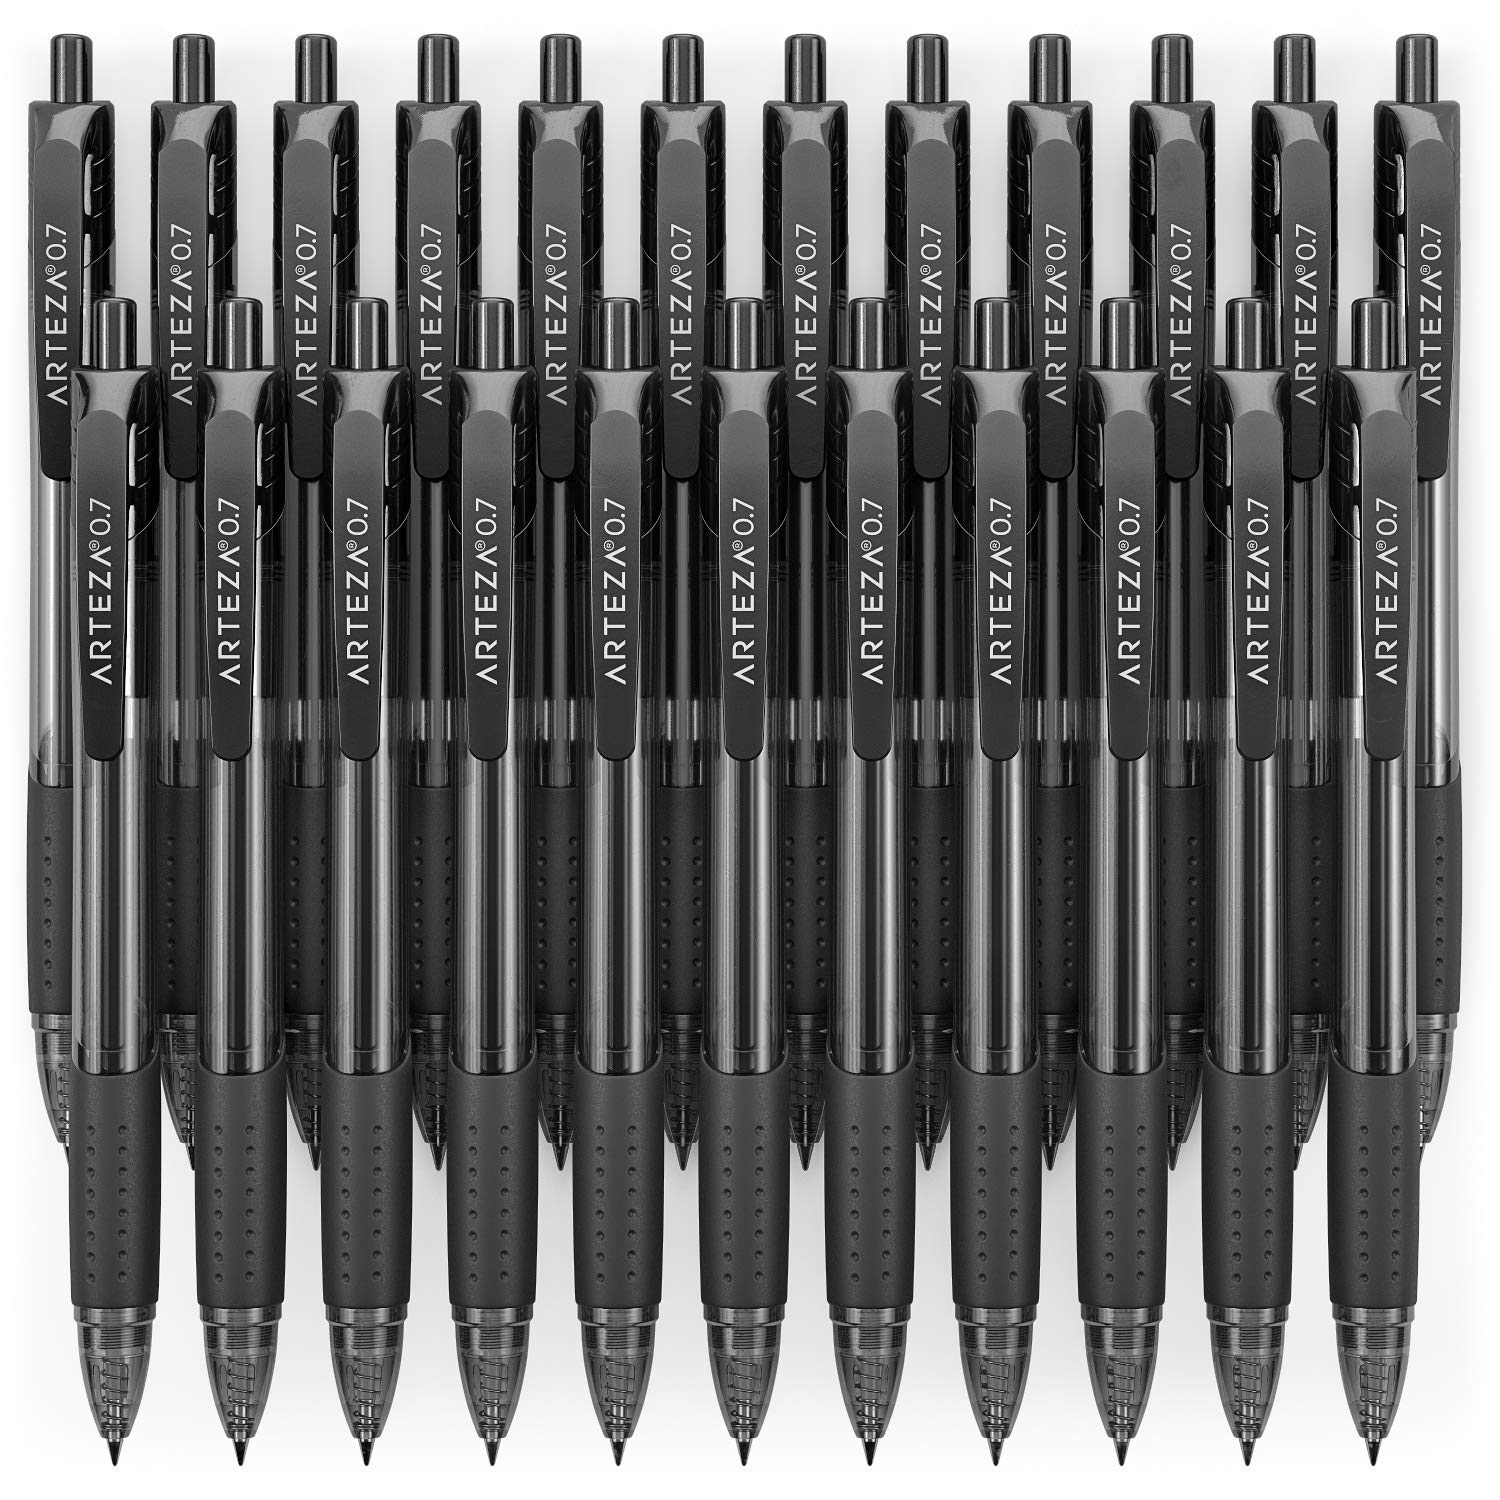 ARTEZA Gel Pens, Pack of 24 Black Roller Ball Pens, 0.7mm Medium Point, Retractable, Quick Drying Ink, Office Supplies for Note-Taking and Journaling